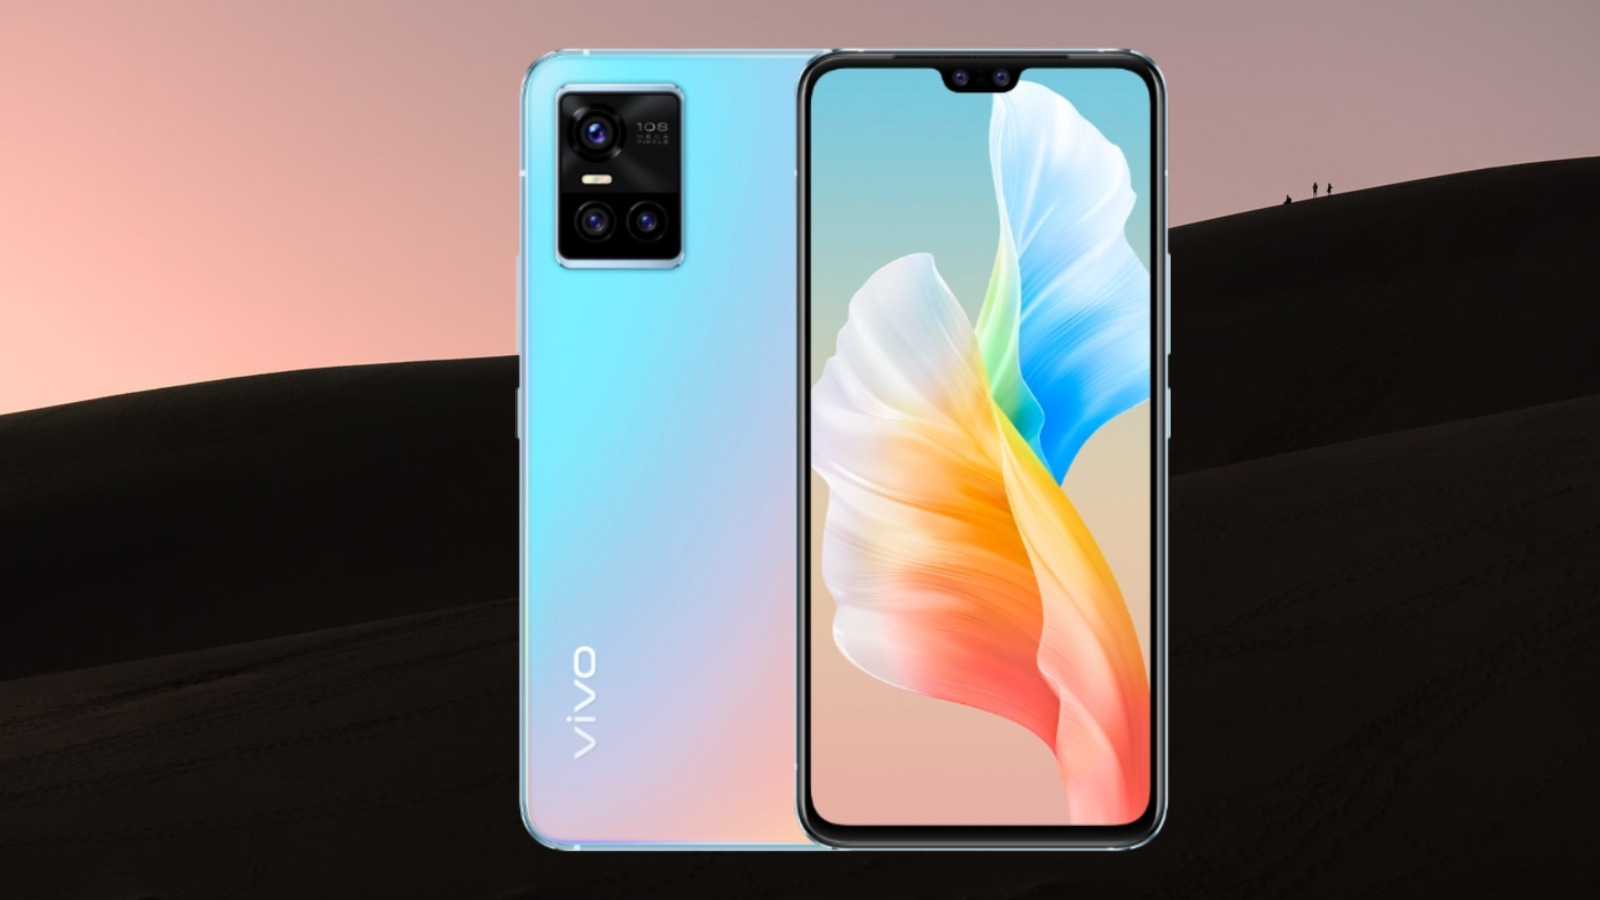 Vivo S10e launched at 2399/2599 yuan with MediaTek Dimensity 900